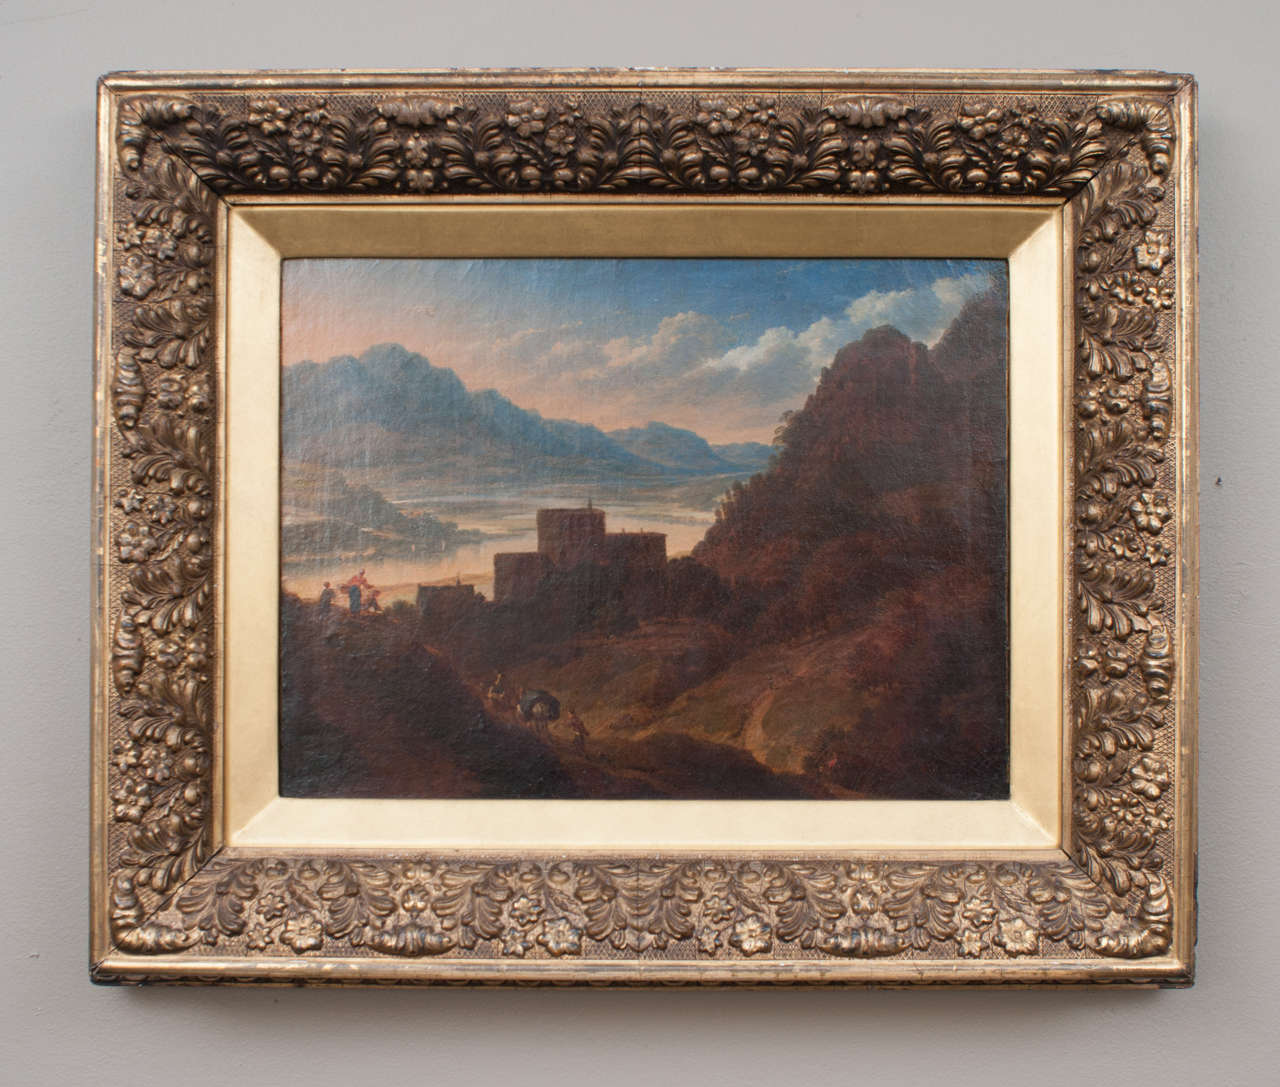 Mountain scene with a caravan heading toward a fortress overlooking a lake. Incredible clouds and blue sky. Written on back of canvas: 